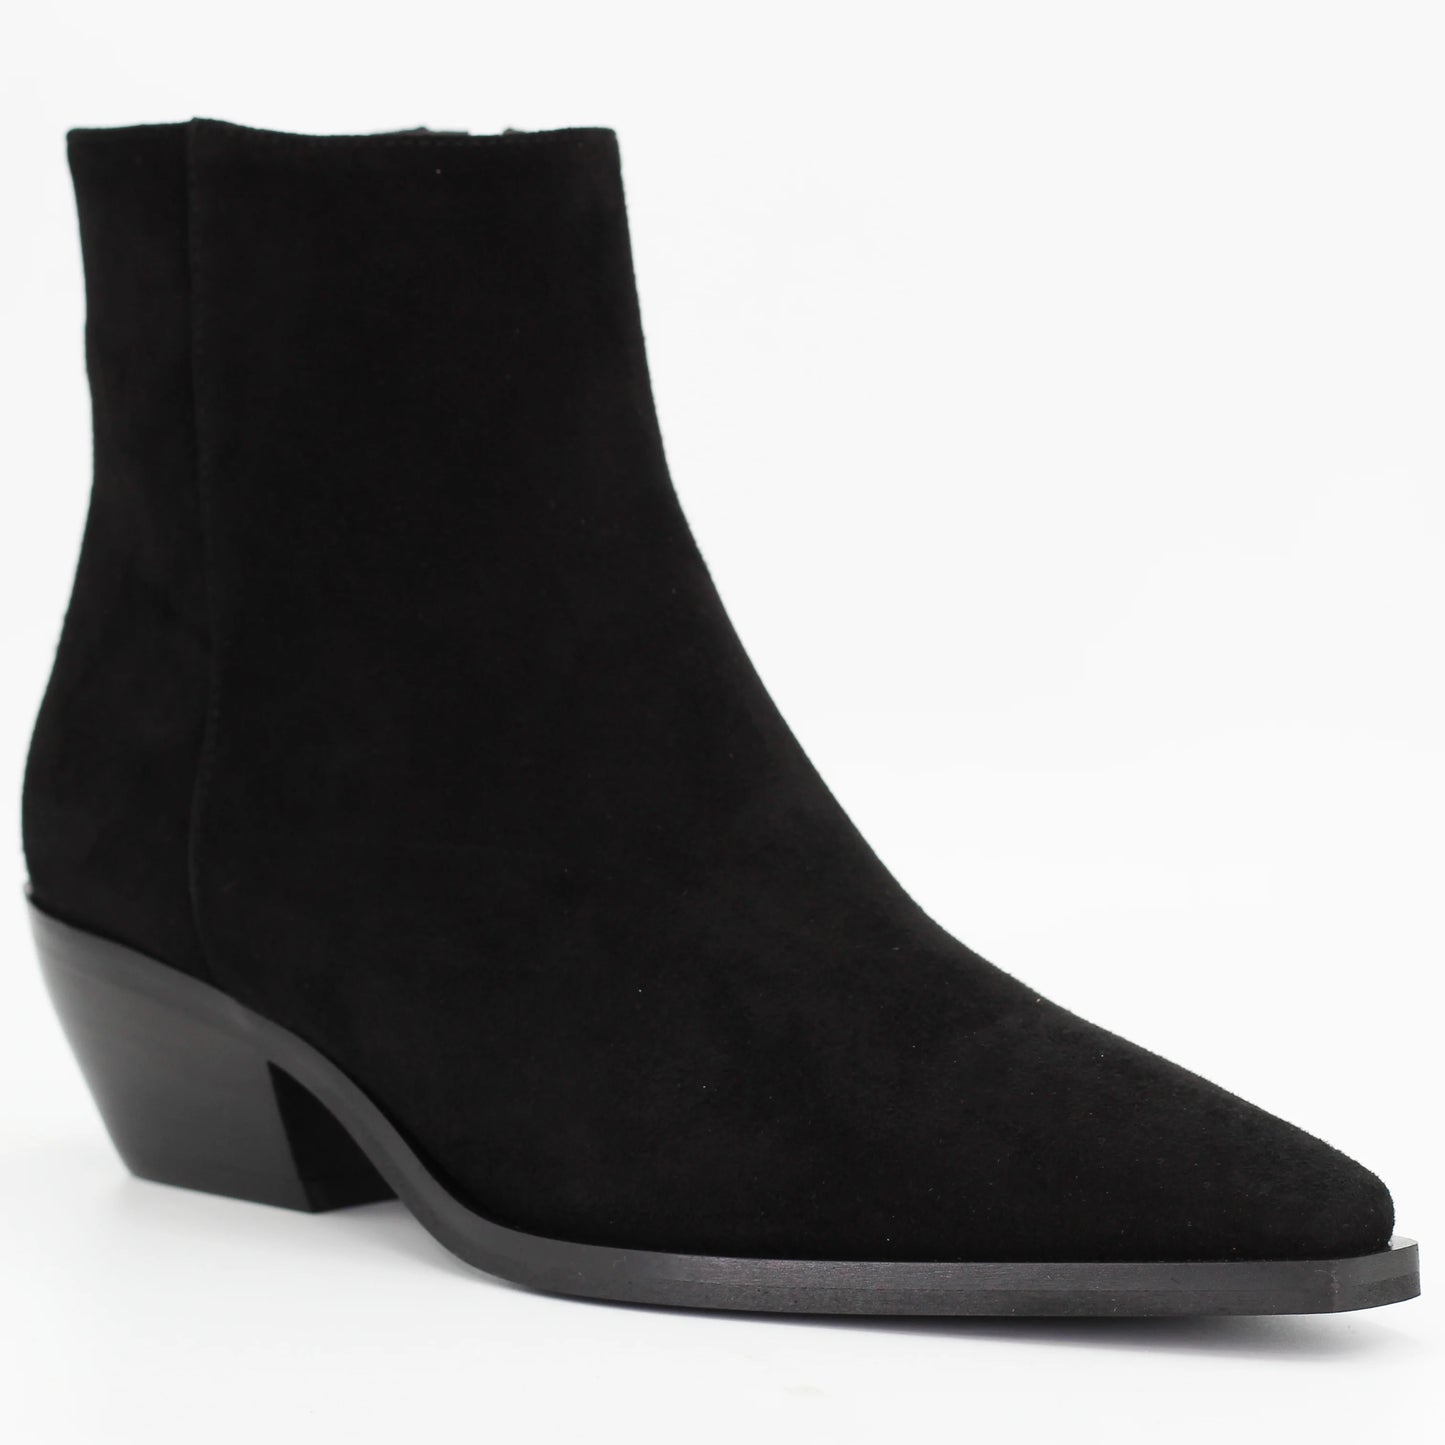 Shop Handmade Italian Leather  pointed toe ankle boot in nero (KRIA3) or browse our range of hand-made Italian shoes in leather or suede in-store at Aliverti Cape Town, or shop online. We deliver in South Africa & offer multiple payment plans as well as accept multiple safe & secure payment methods.